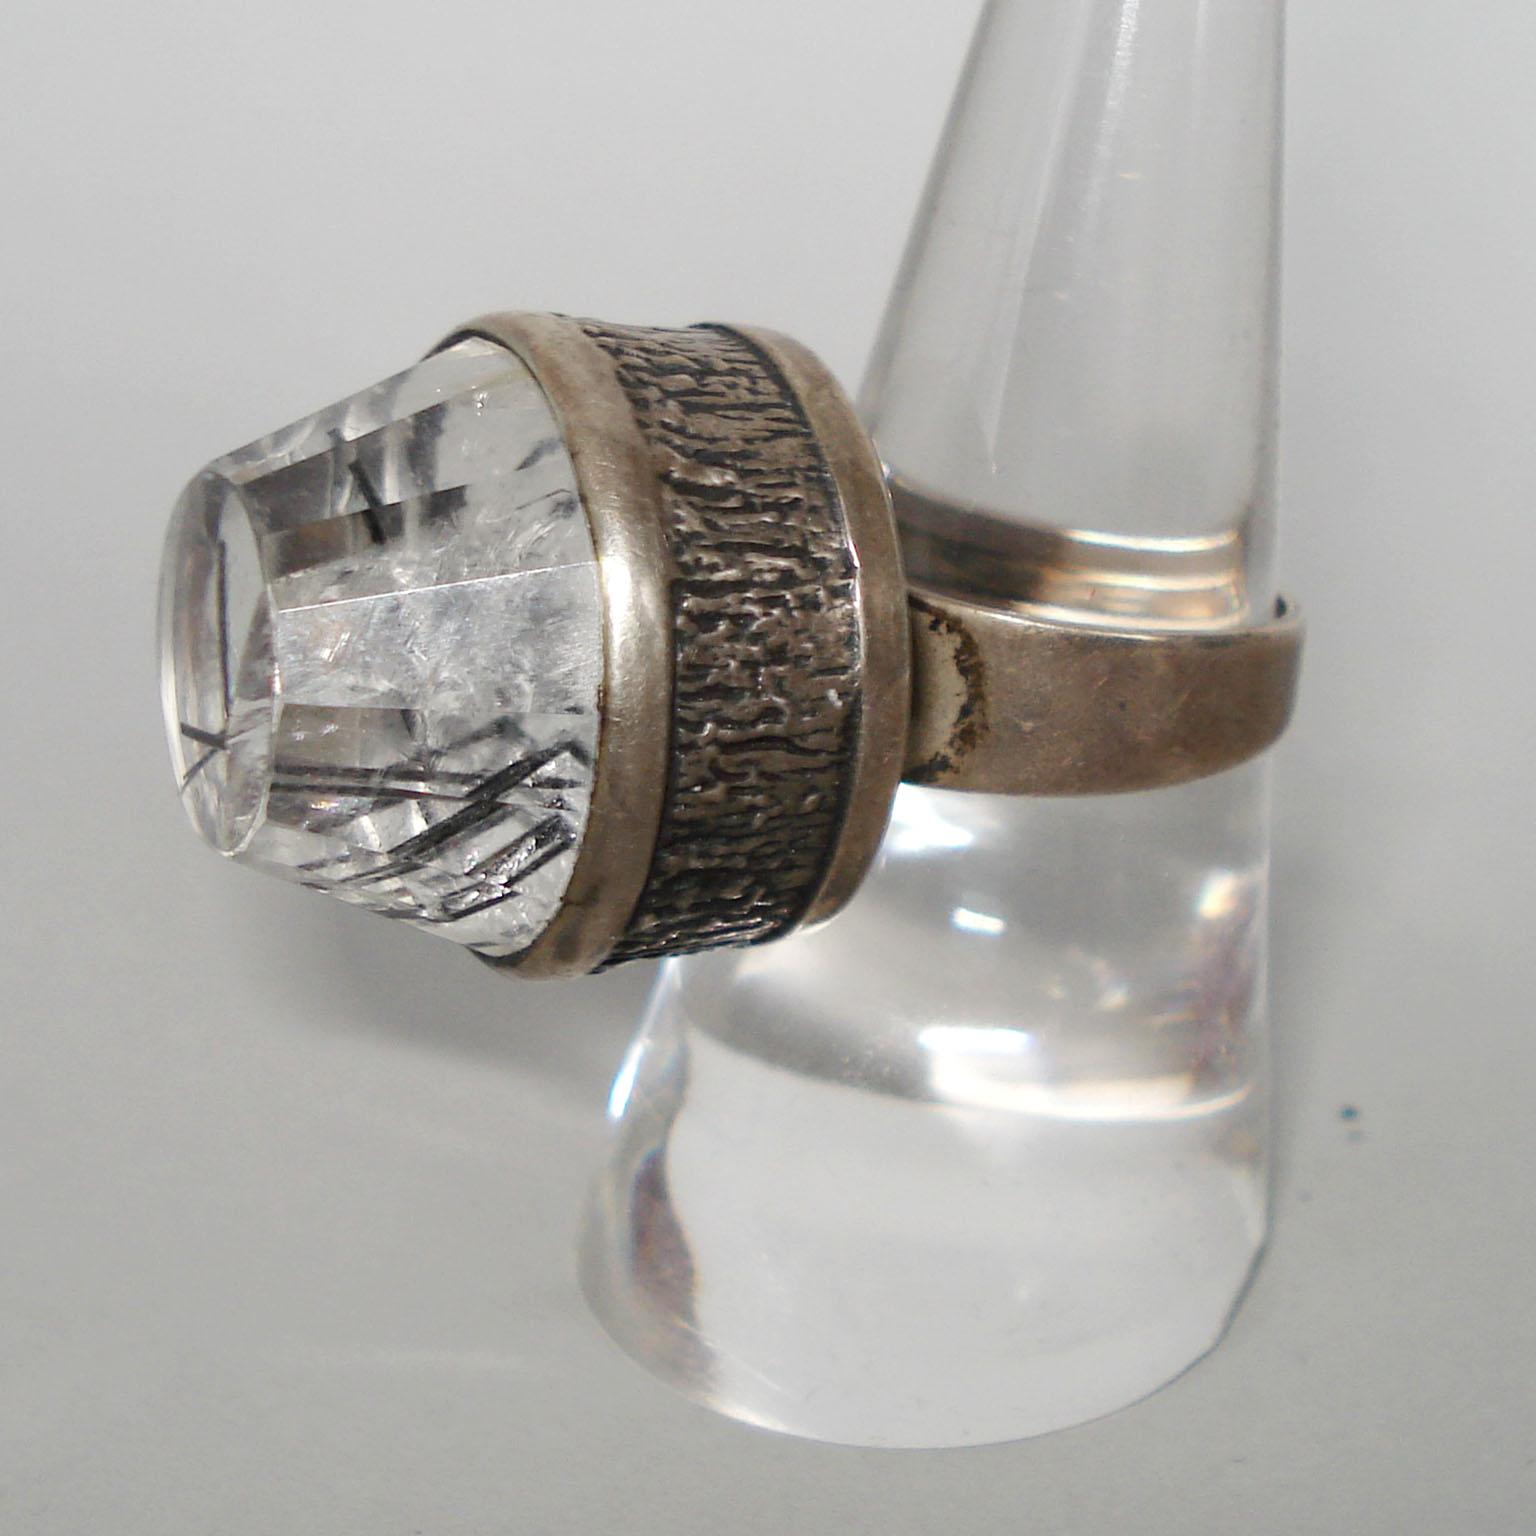 Bengt Hallberg Silver Ring with Rock Crystal, Mid-Century, Sweden, 1969.
A big Mid-Century Modern silver and rock crystal ring, by Bengt Hallberg, Sweden, 1969.
Marks: Bengt Hallberg makers mark, town mark from Köping, the Three Crowns of the